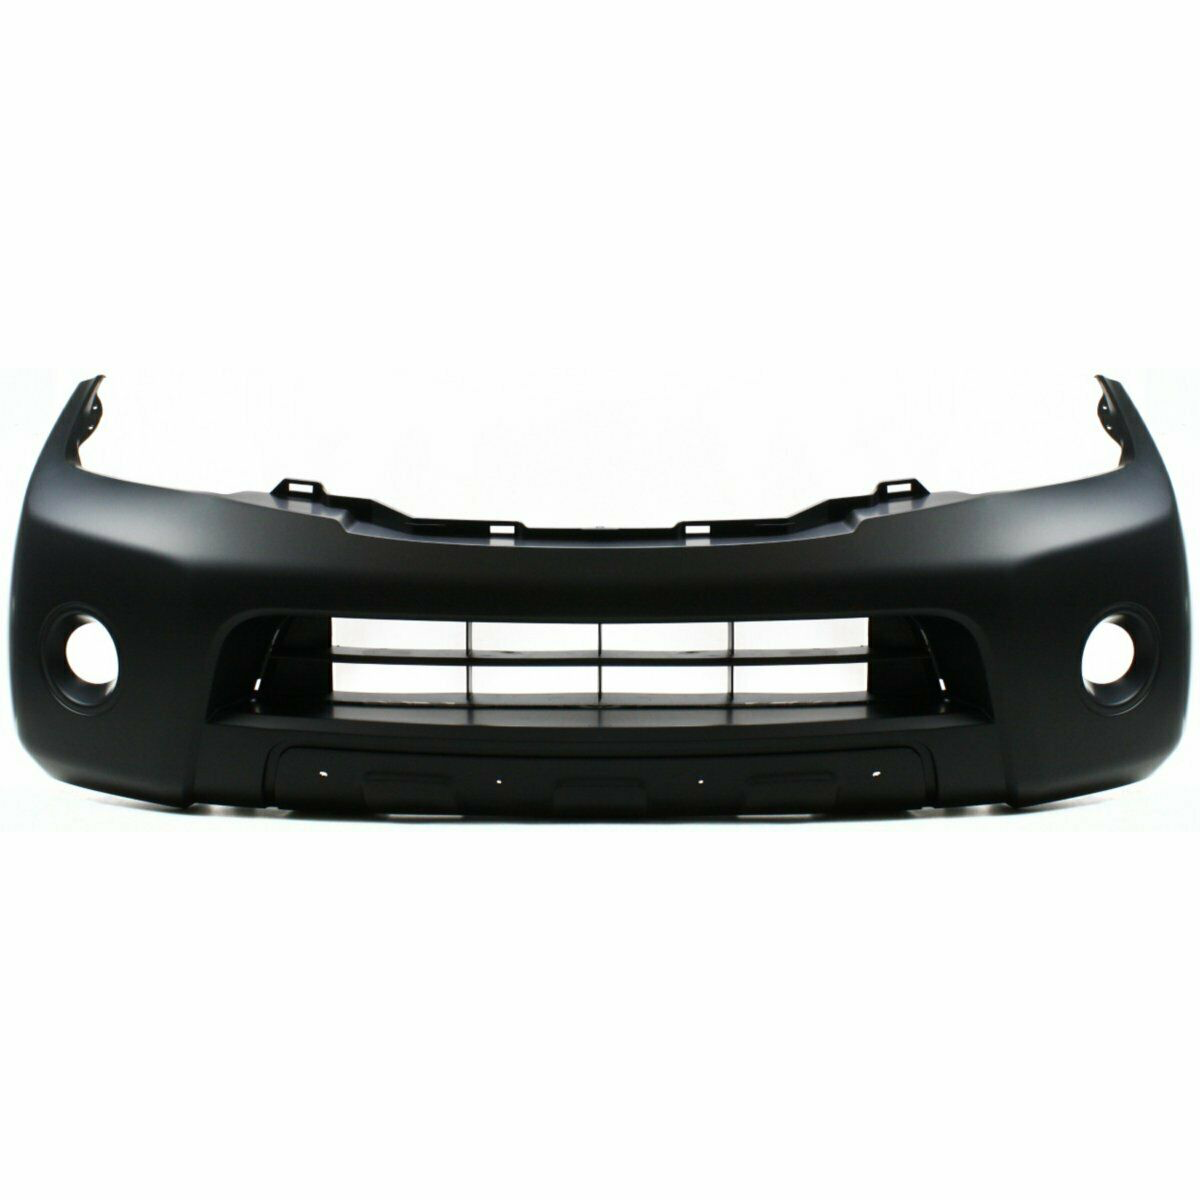 2008-2010 Nissan Pathfinder Front Bumper Painted to Match